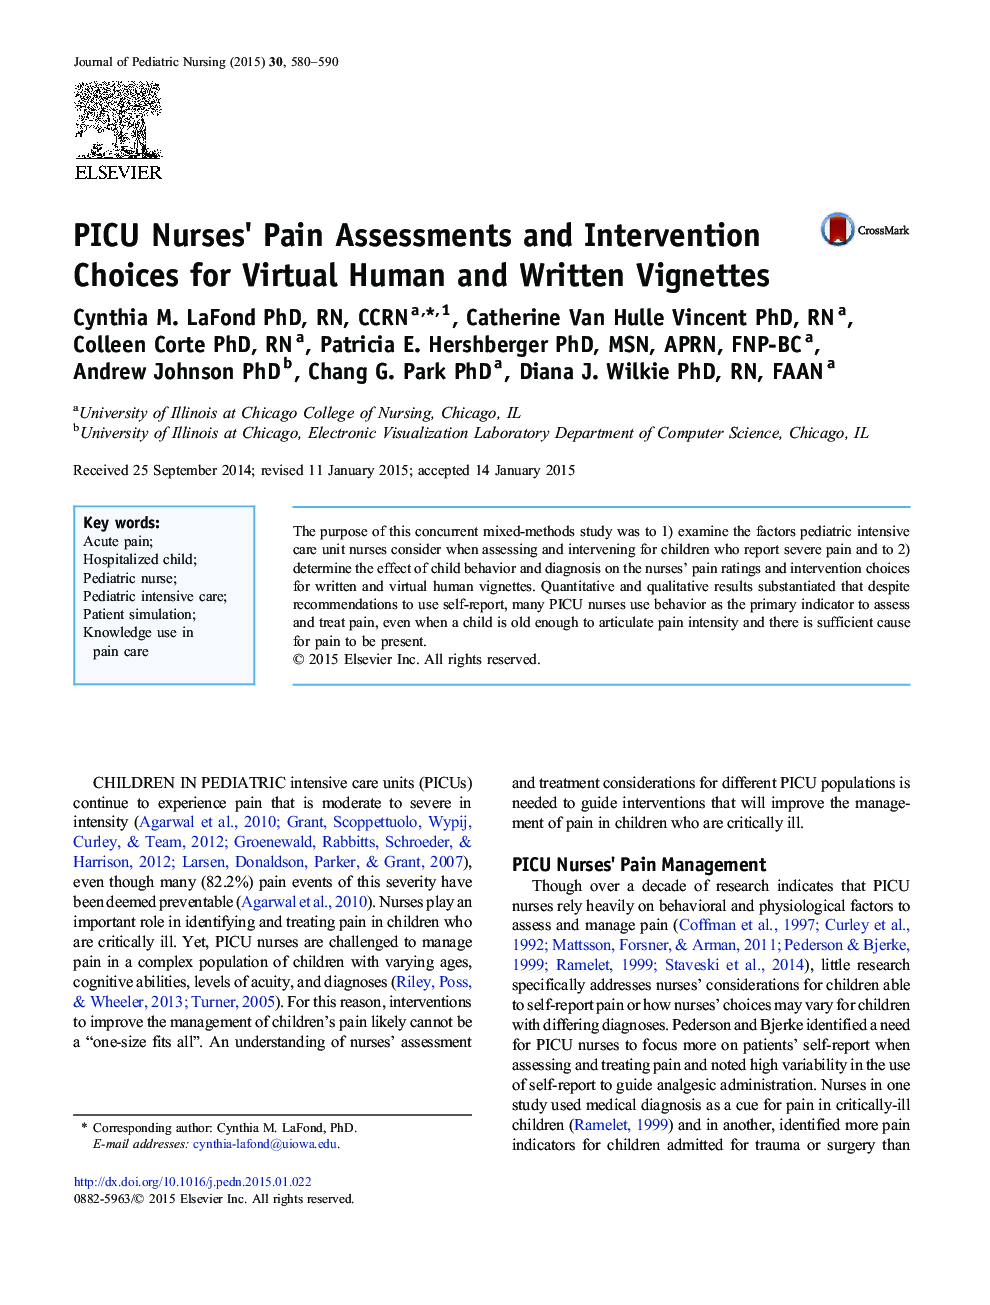 PICU Nurses' Pain Assessments and Intervention Choices for Virtual Human and Written Vignettes